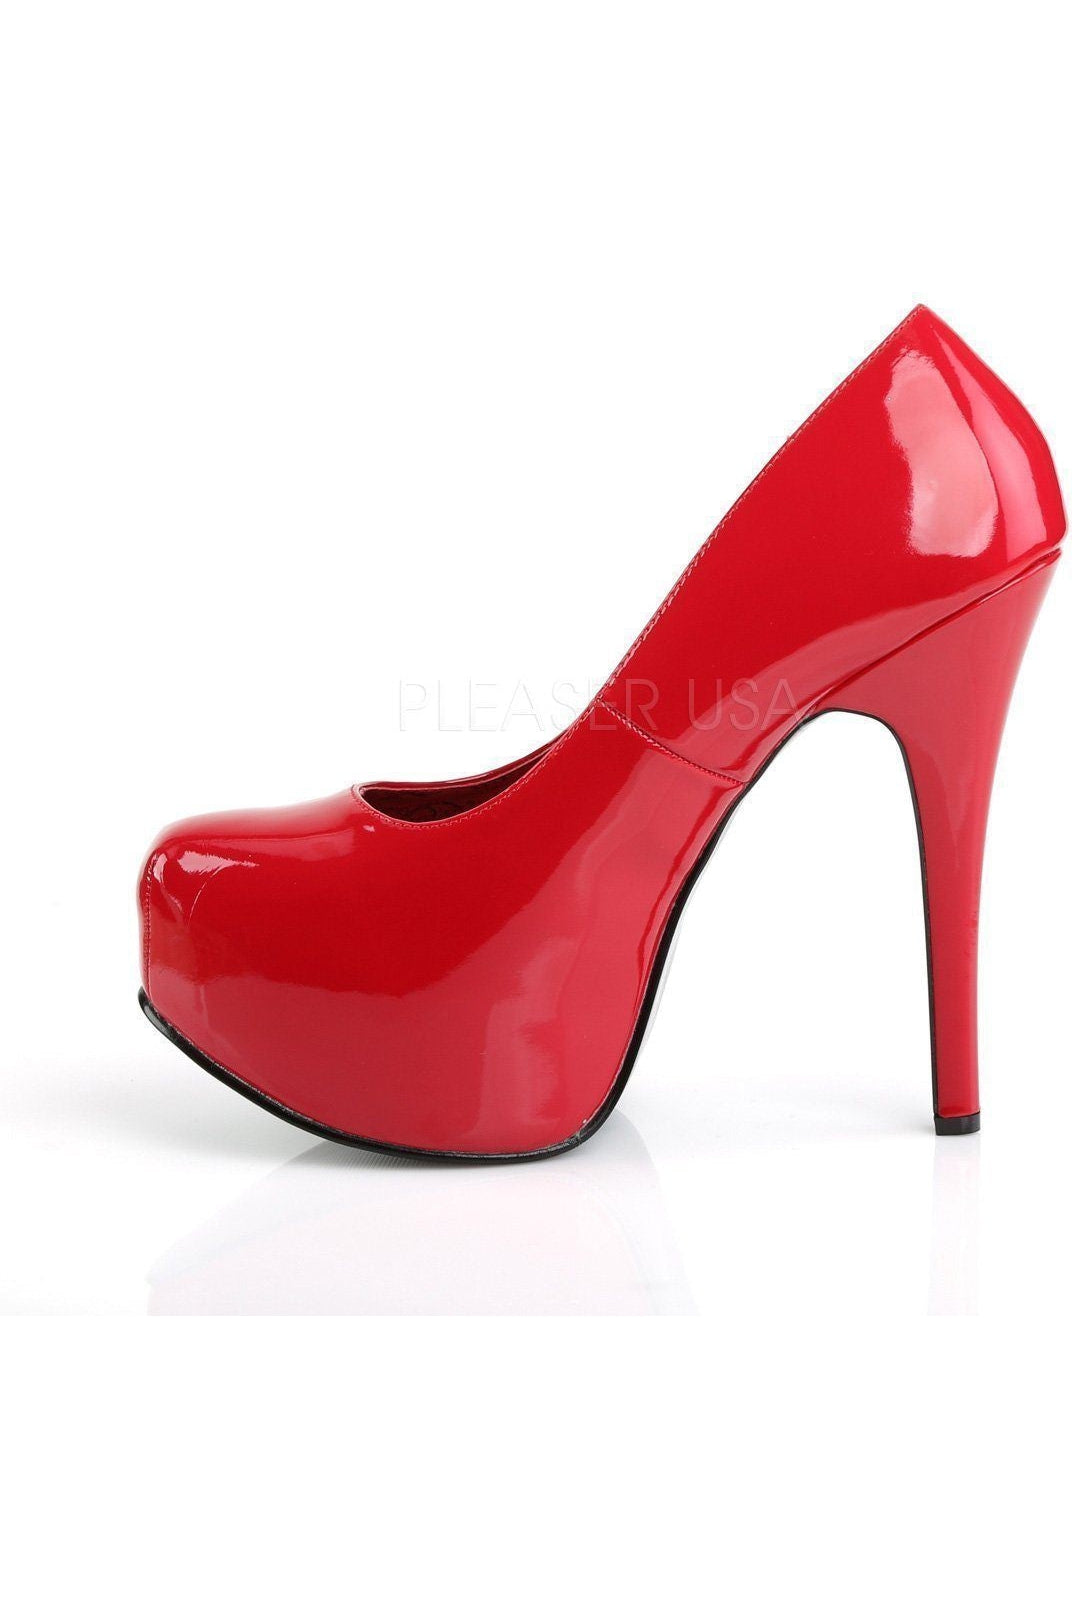 TEEZE-06W Pump | Red Patent-Pleaser Pink Label-Pumps-SEXYSHOES.COM